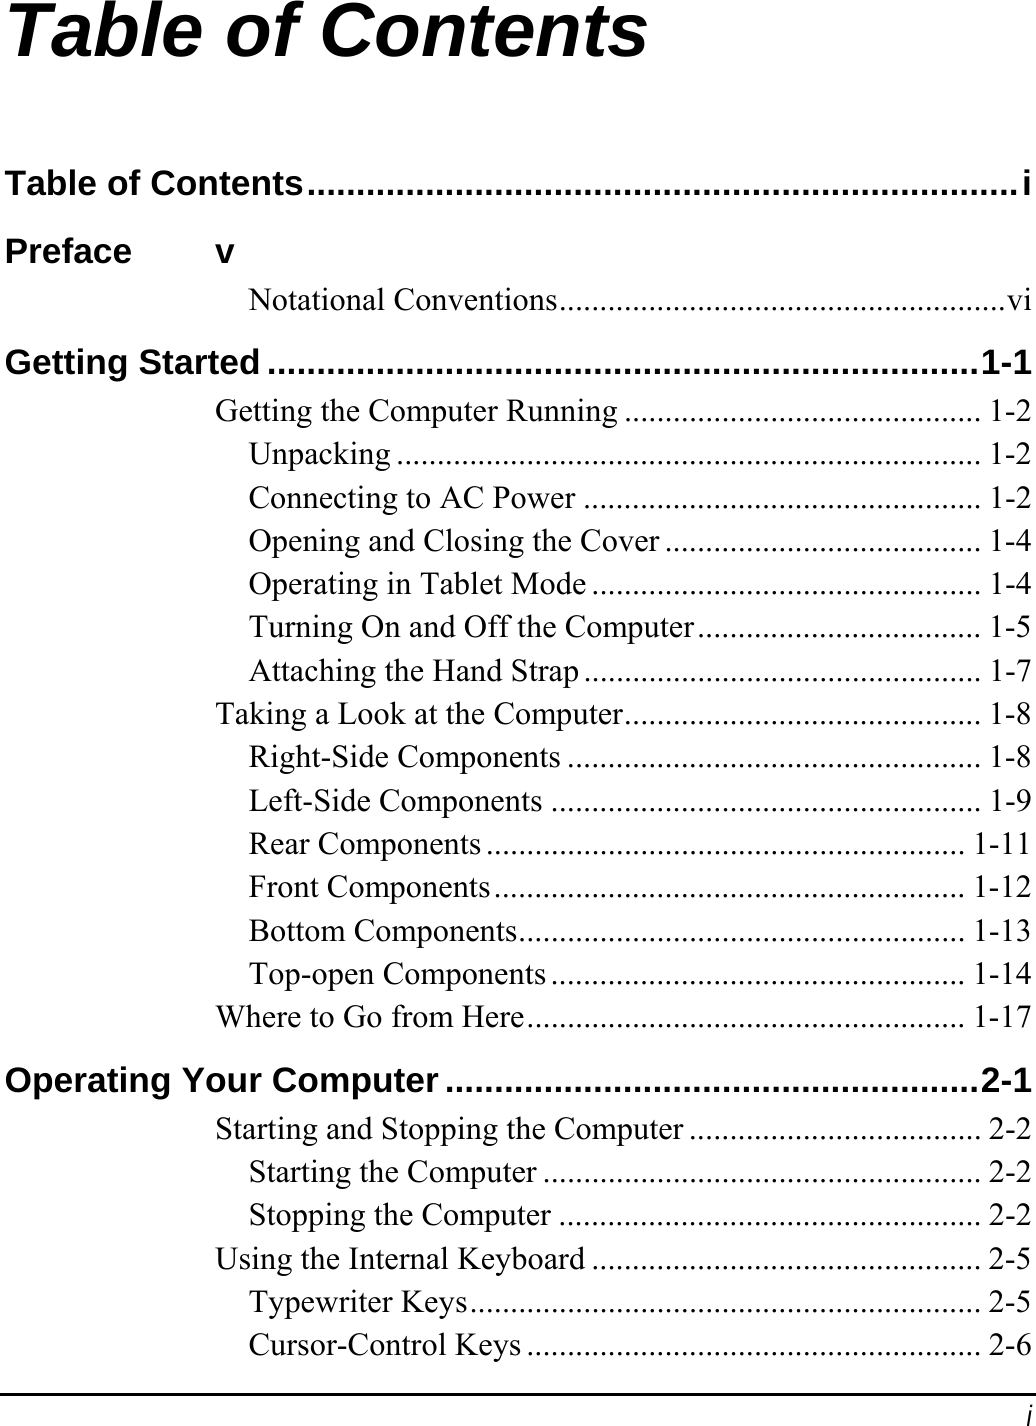  i Table of Contents Table of Contents........................................................................i Preface v Notational Conventions.......................................................vi Getting Started ........................................................................1-1 Getting the Computer Running ............................................ 1-2 Unpacking ........................................................................ 1-2 Connecting to AC Power ................................................. 1-2 Opening and Closing the Cover ....................................... 1-4 Operating in Tablet Mode ................................................ 1-4 Turning On and Off the Computer................................... 1-5 Attaching the Hand Strap ................................................. 1-7 Taking a Look at the Computer............................................ 1-8 Right-Side Components ................................................... 1-8 Left-Side Components ..................................................... 1-9 Rear Components ........................................................... 1-11 Front Components.......................................................... 1-12 Bottom Components....................................................... 1-13 Top-open Components................................................... 1-14 Where to Go from Here...................................................... 1-17 Operating Your Computer......................................................2-1 Starting and Stopping the Computer .................................... 2-2 Starting the Computer ...................................................... 2-2 Stopping the Computer .................................................... 2-2 Using the Internal Keyboard ................................................ 2-5 Typewriter Keys............................................................... 2-5 Cursor-Control Keys ........................................................ 2-6 